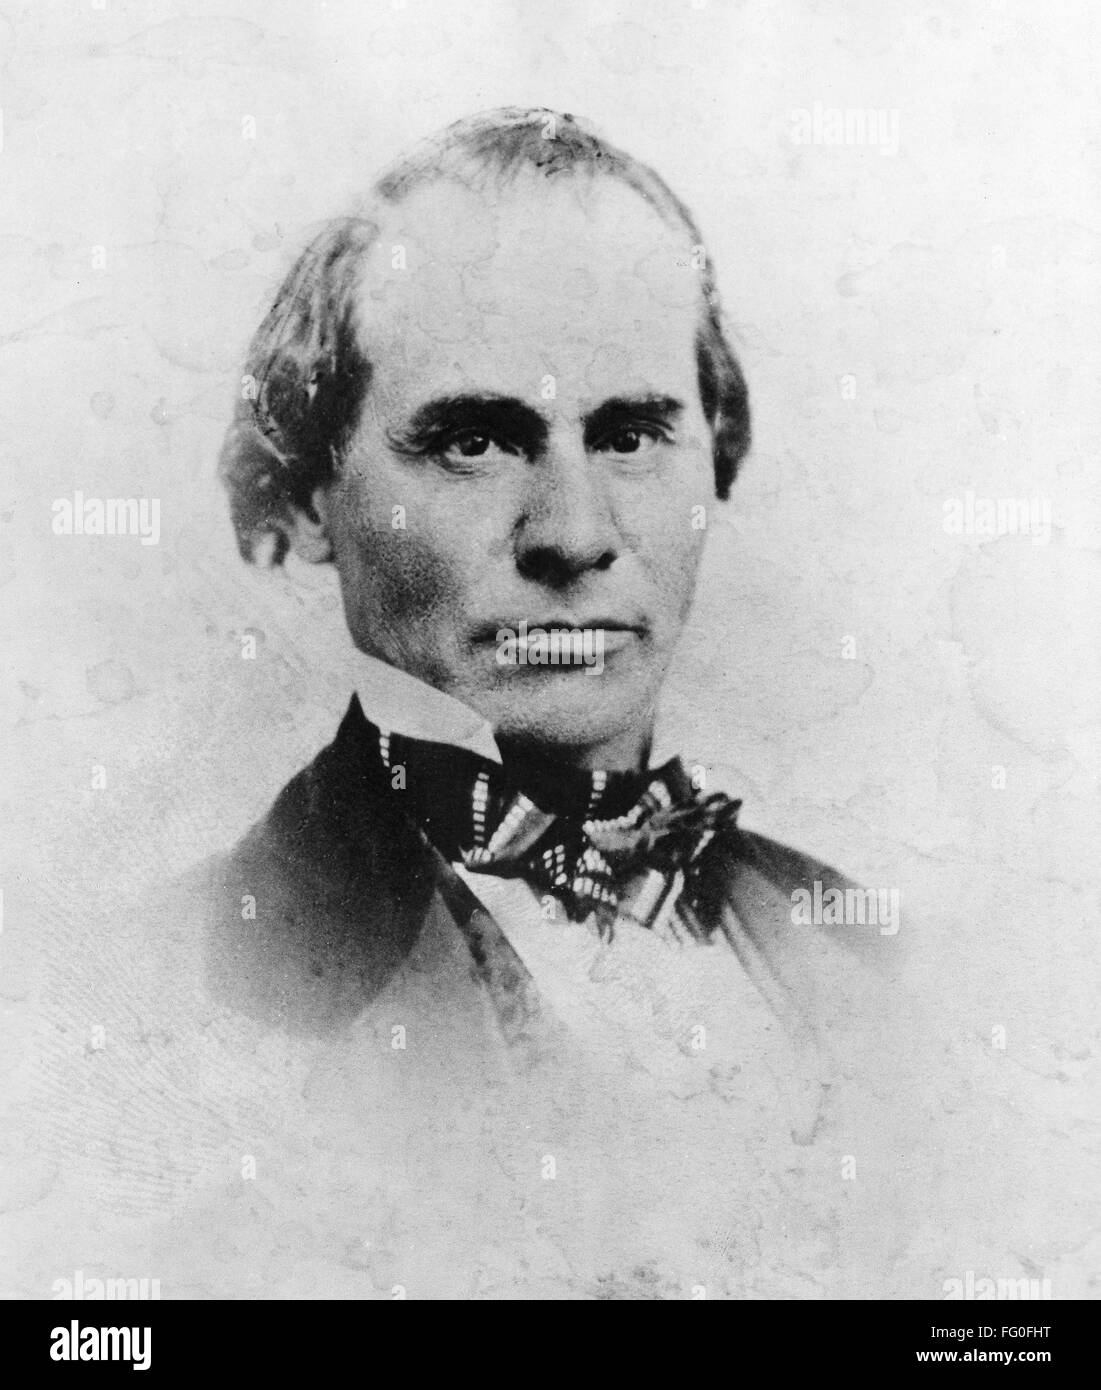 WILLIAM BENT (1809-1869). /nAmerican frontiersman and fur trader. Photographed c1850. Stock Photo